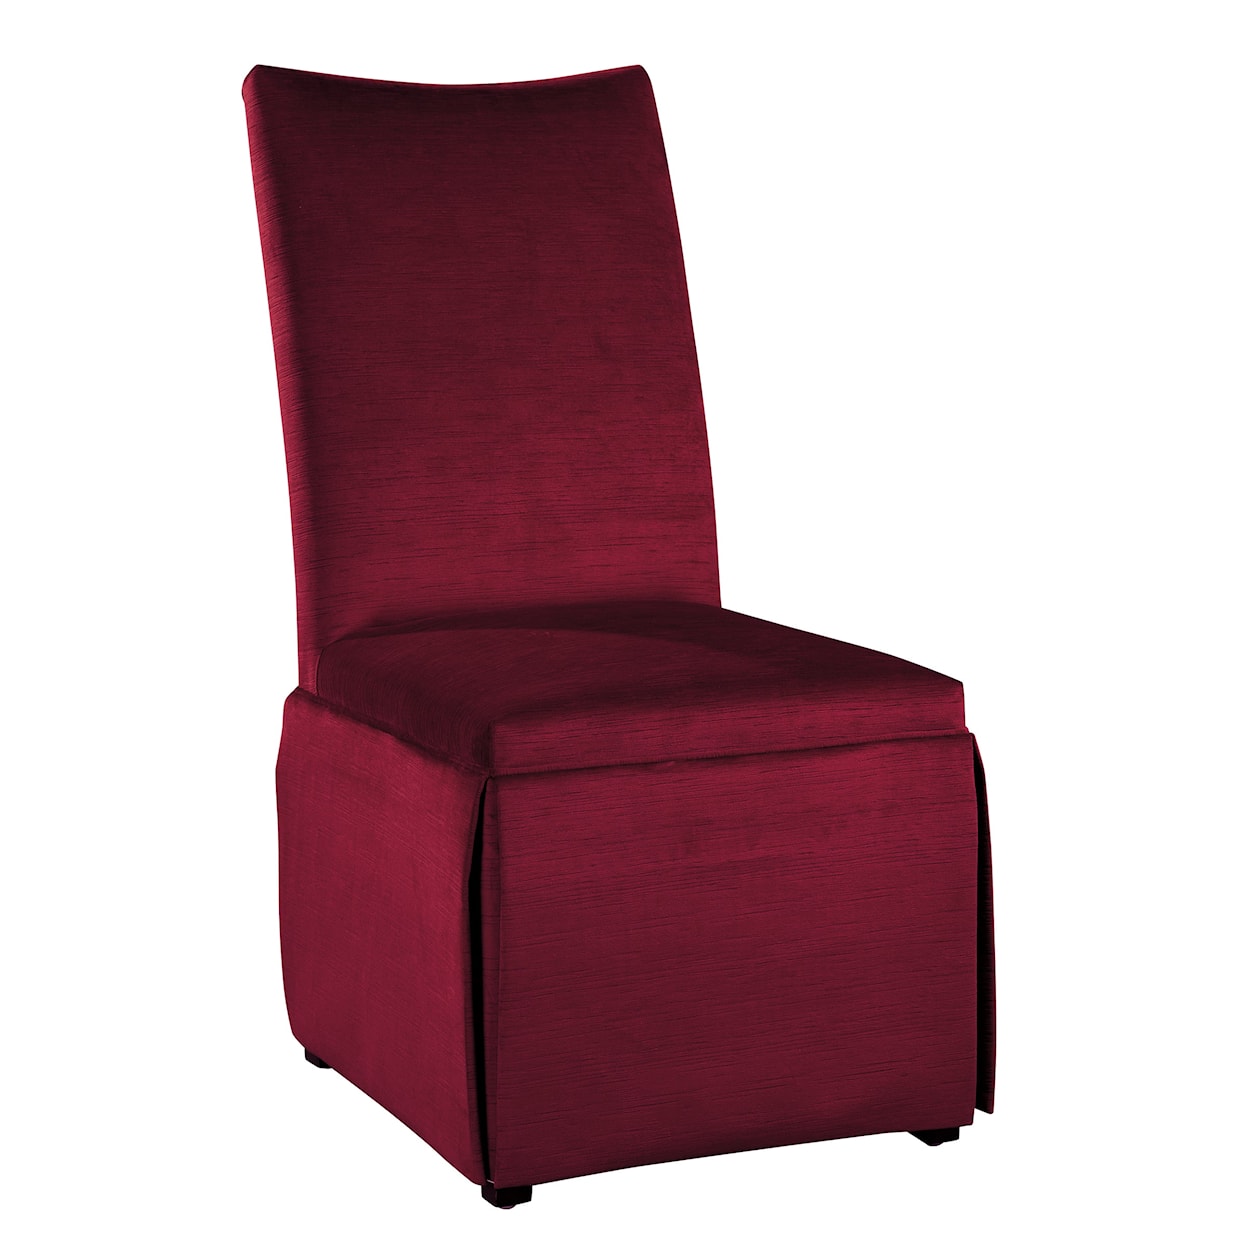 Hekman Upholstery Elise Dining Chair